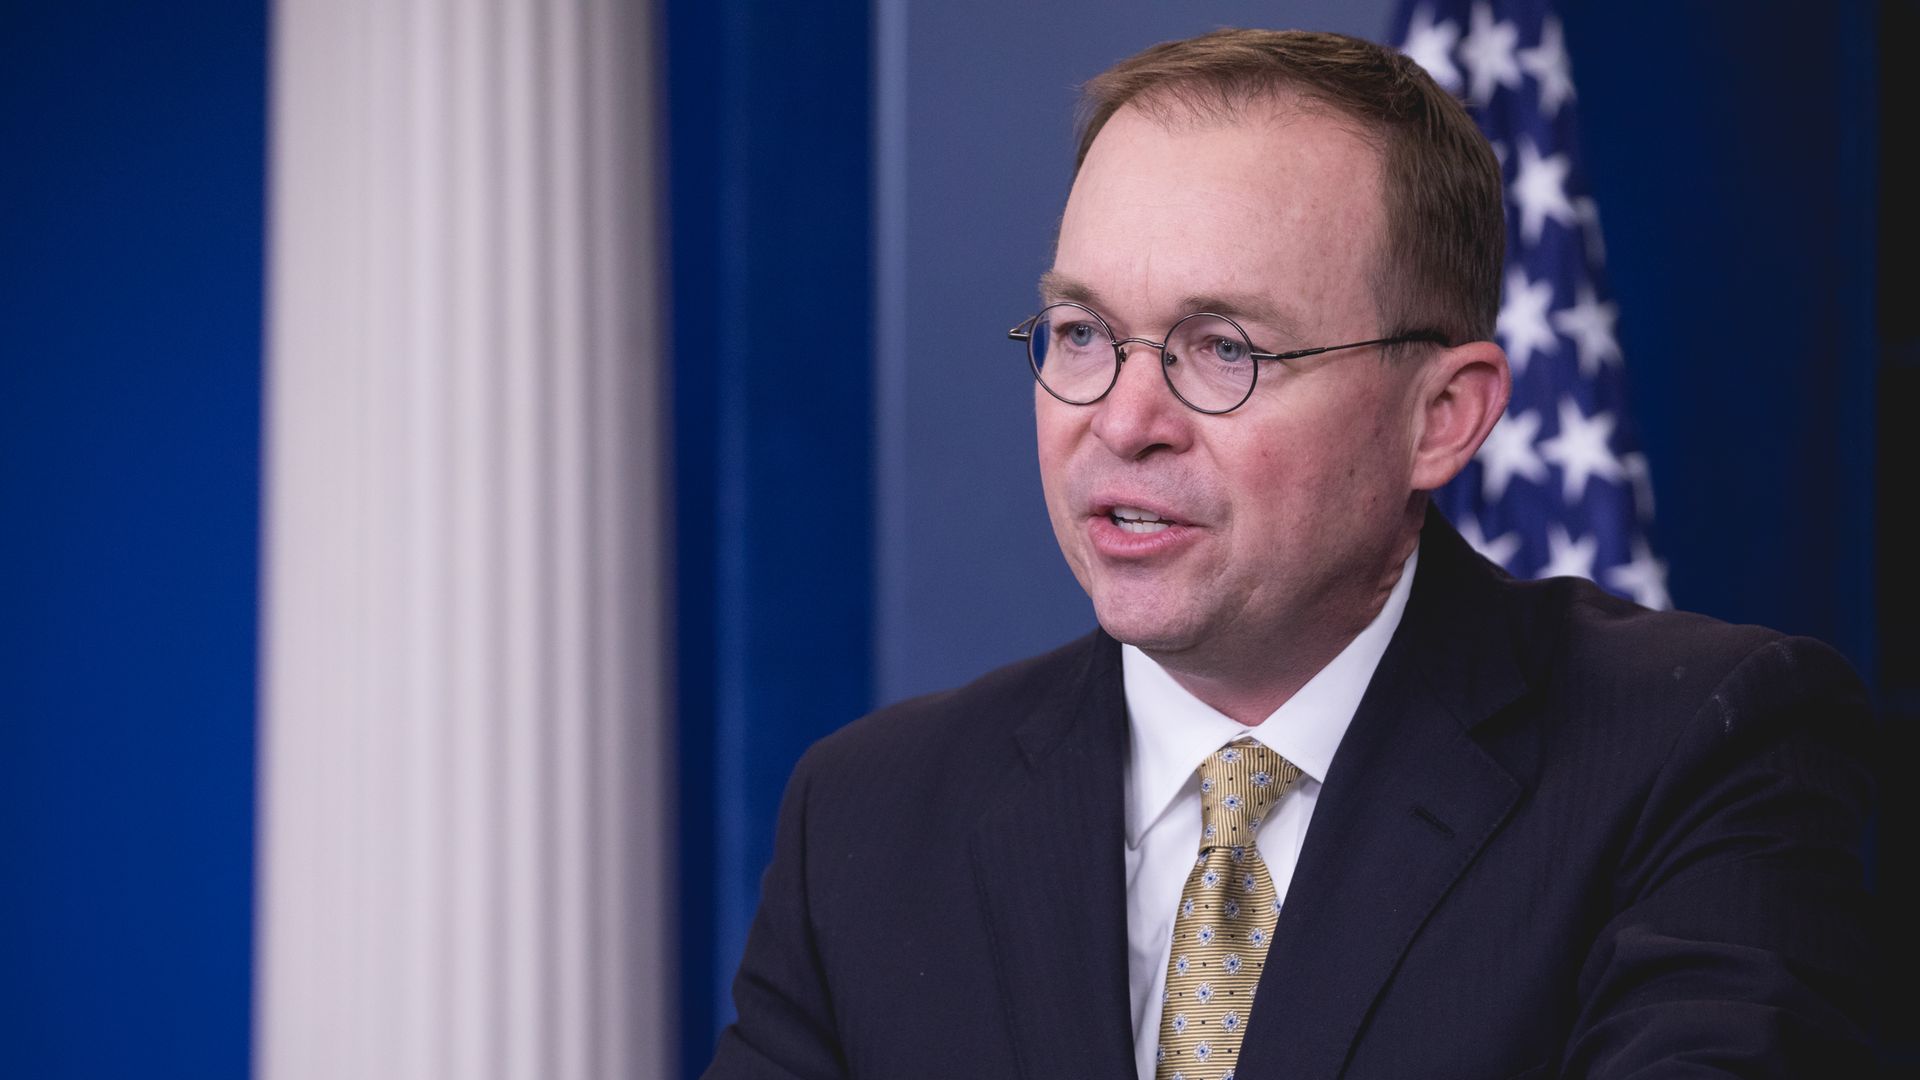 Mick Mulvaney, White House budget chief and acting director of the Consumer Financial Protection Bureau